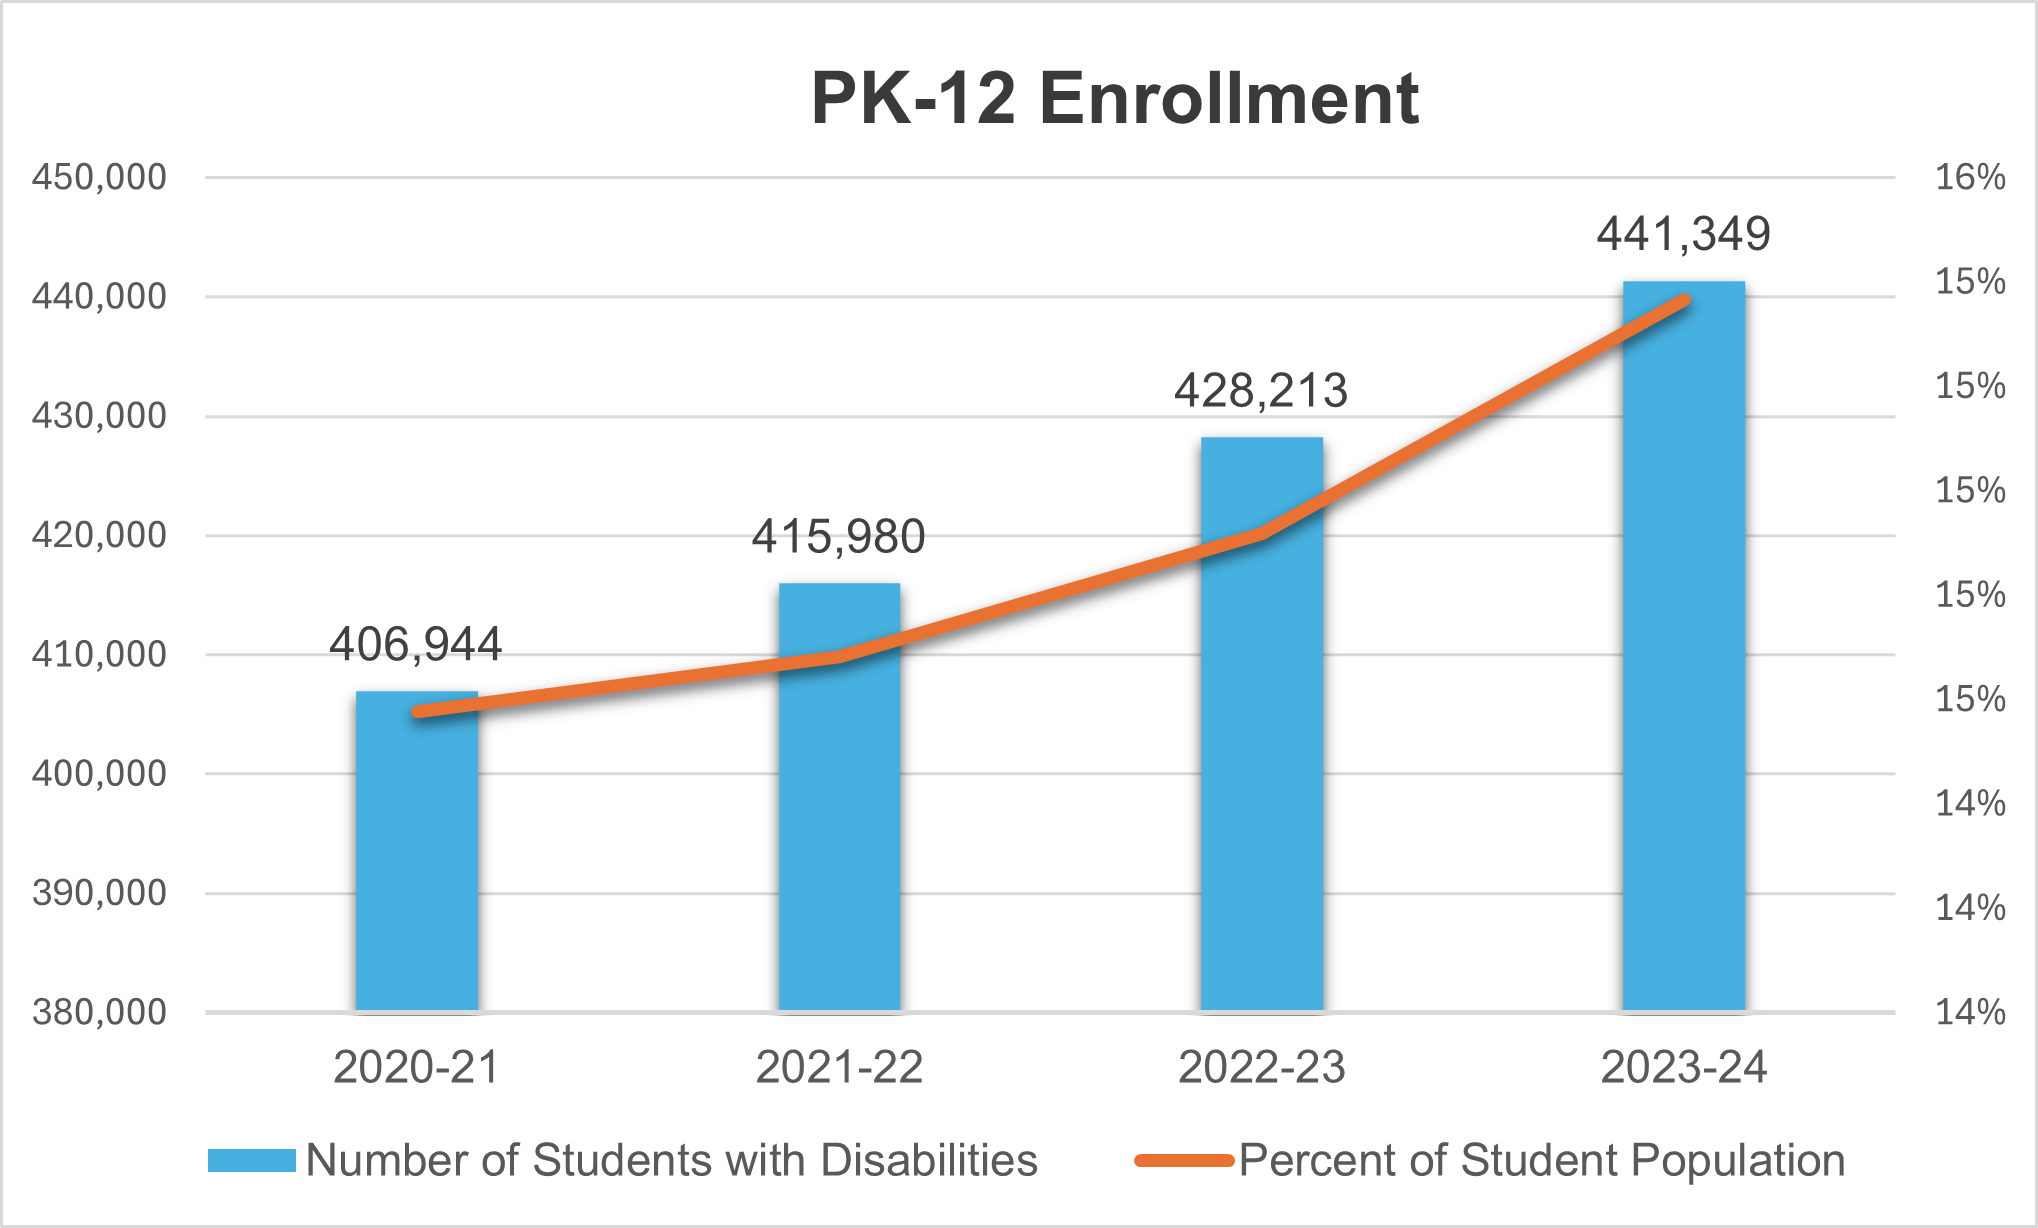 Florida’s PK-12 school population includes more than 400,000 students with disabilities, and this number has been growing.